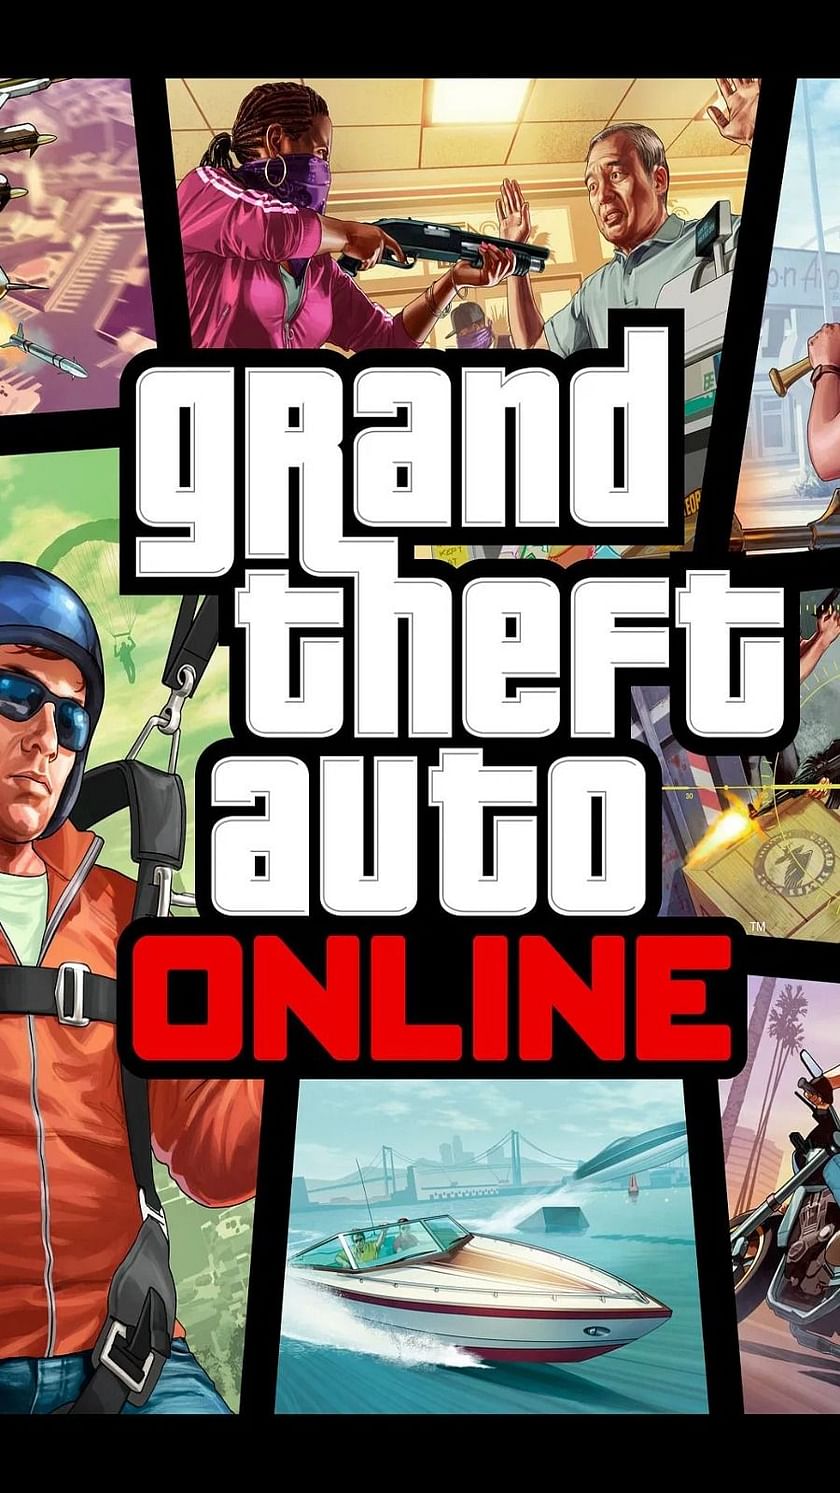 GTA Online is shutting down for PS3 and Xbox 360 later this year - The Verge